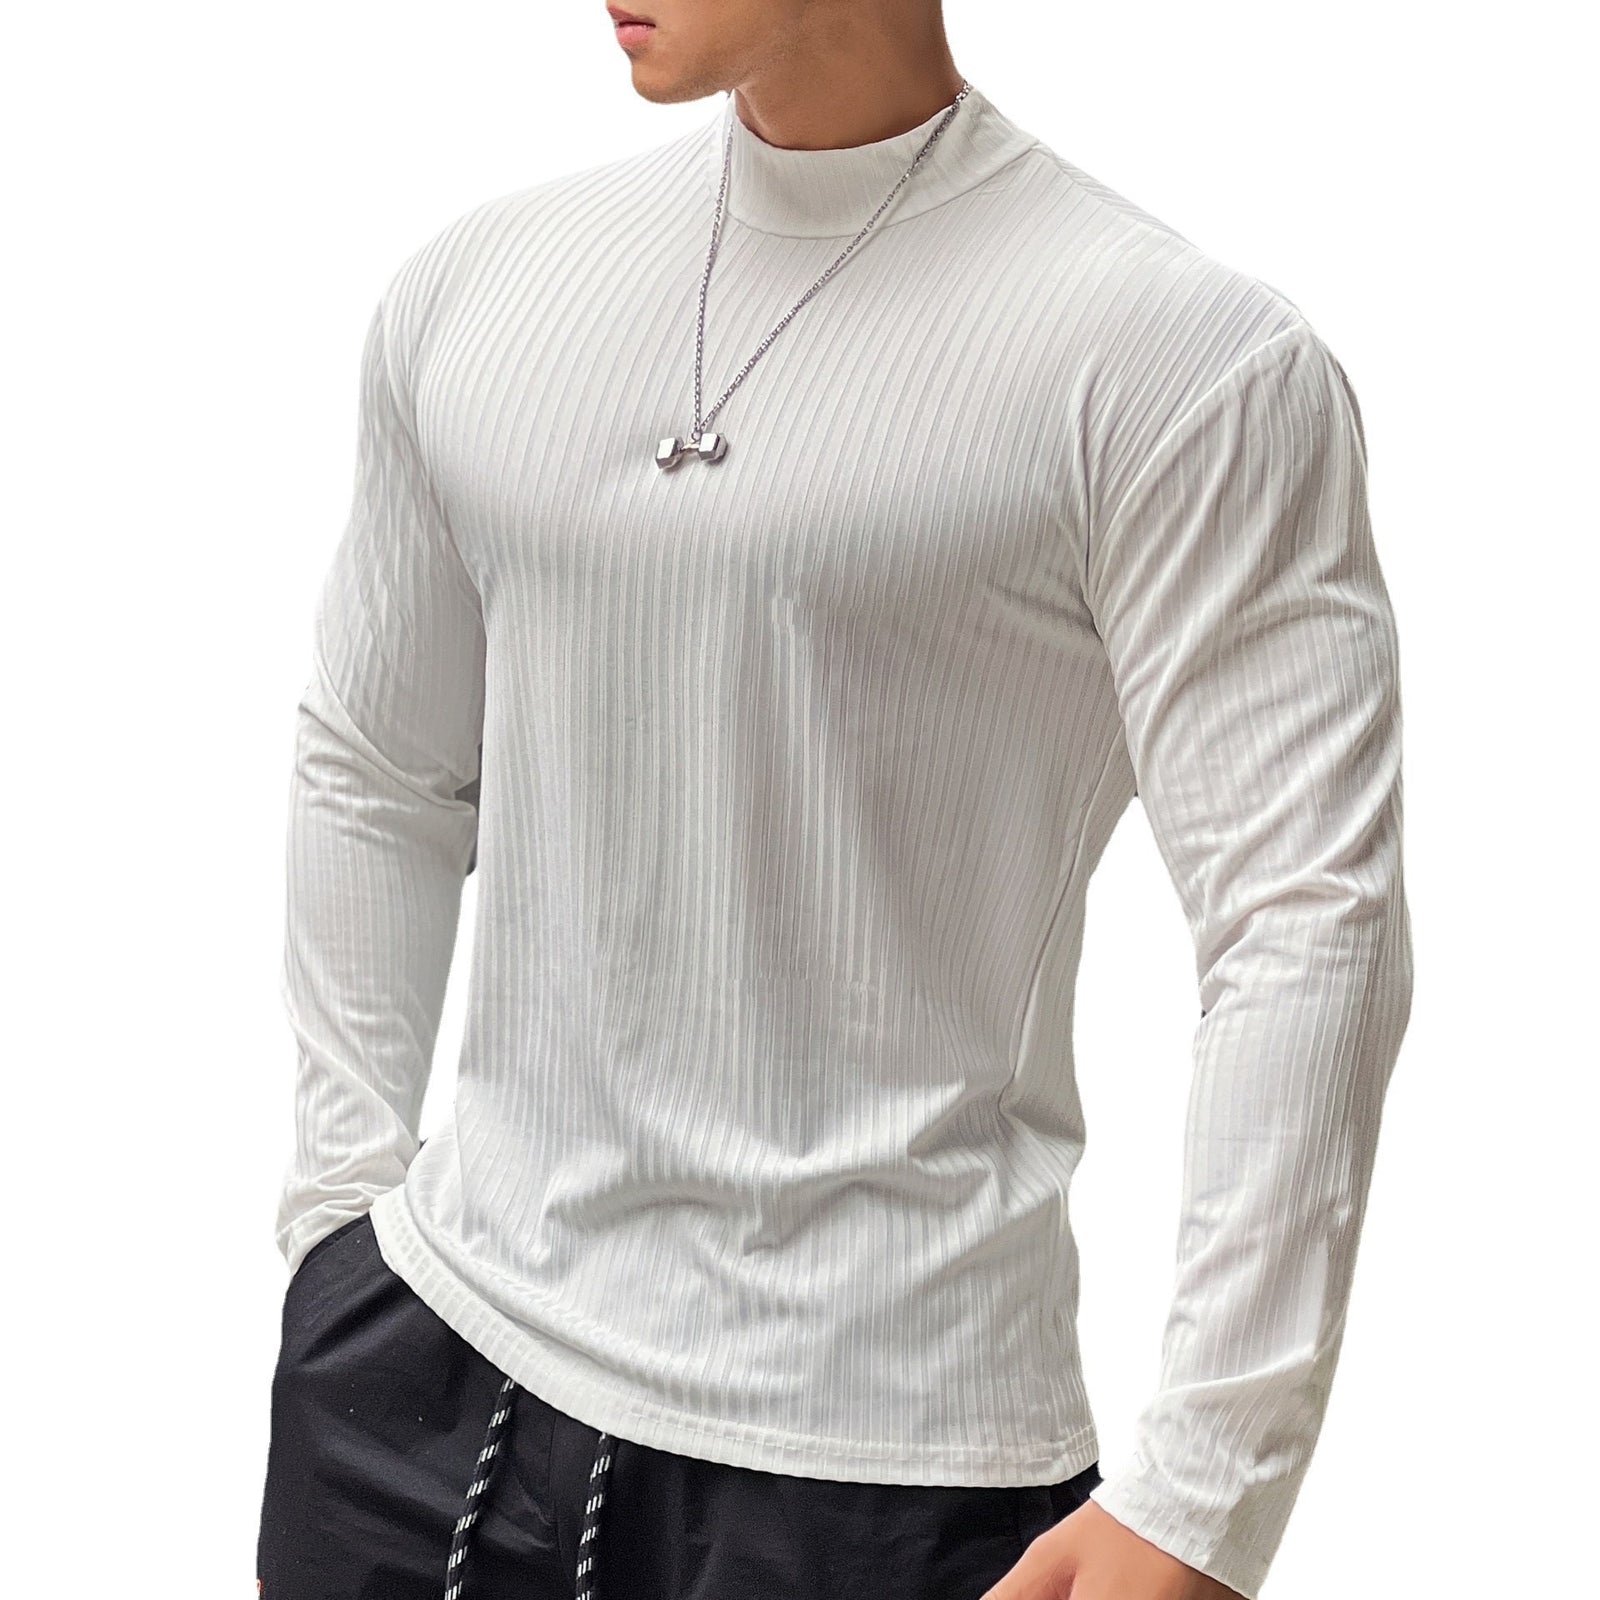 Autumn Casual Skinny T-shirt Men Long Sleeves Solid Shirt Gym Fitness Bodybuilding Tees Black Tops Male Fashion Stripes Clothing